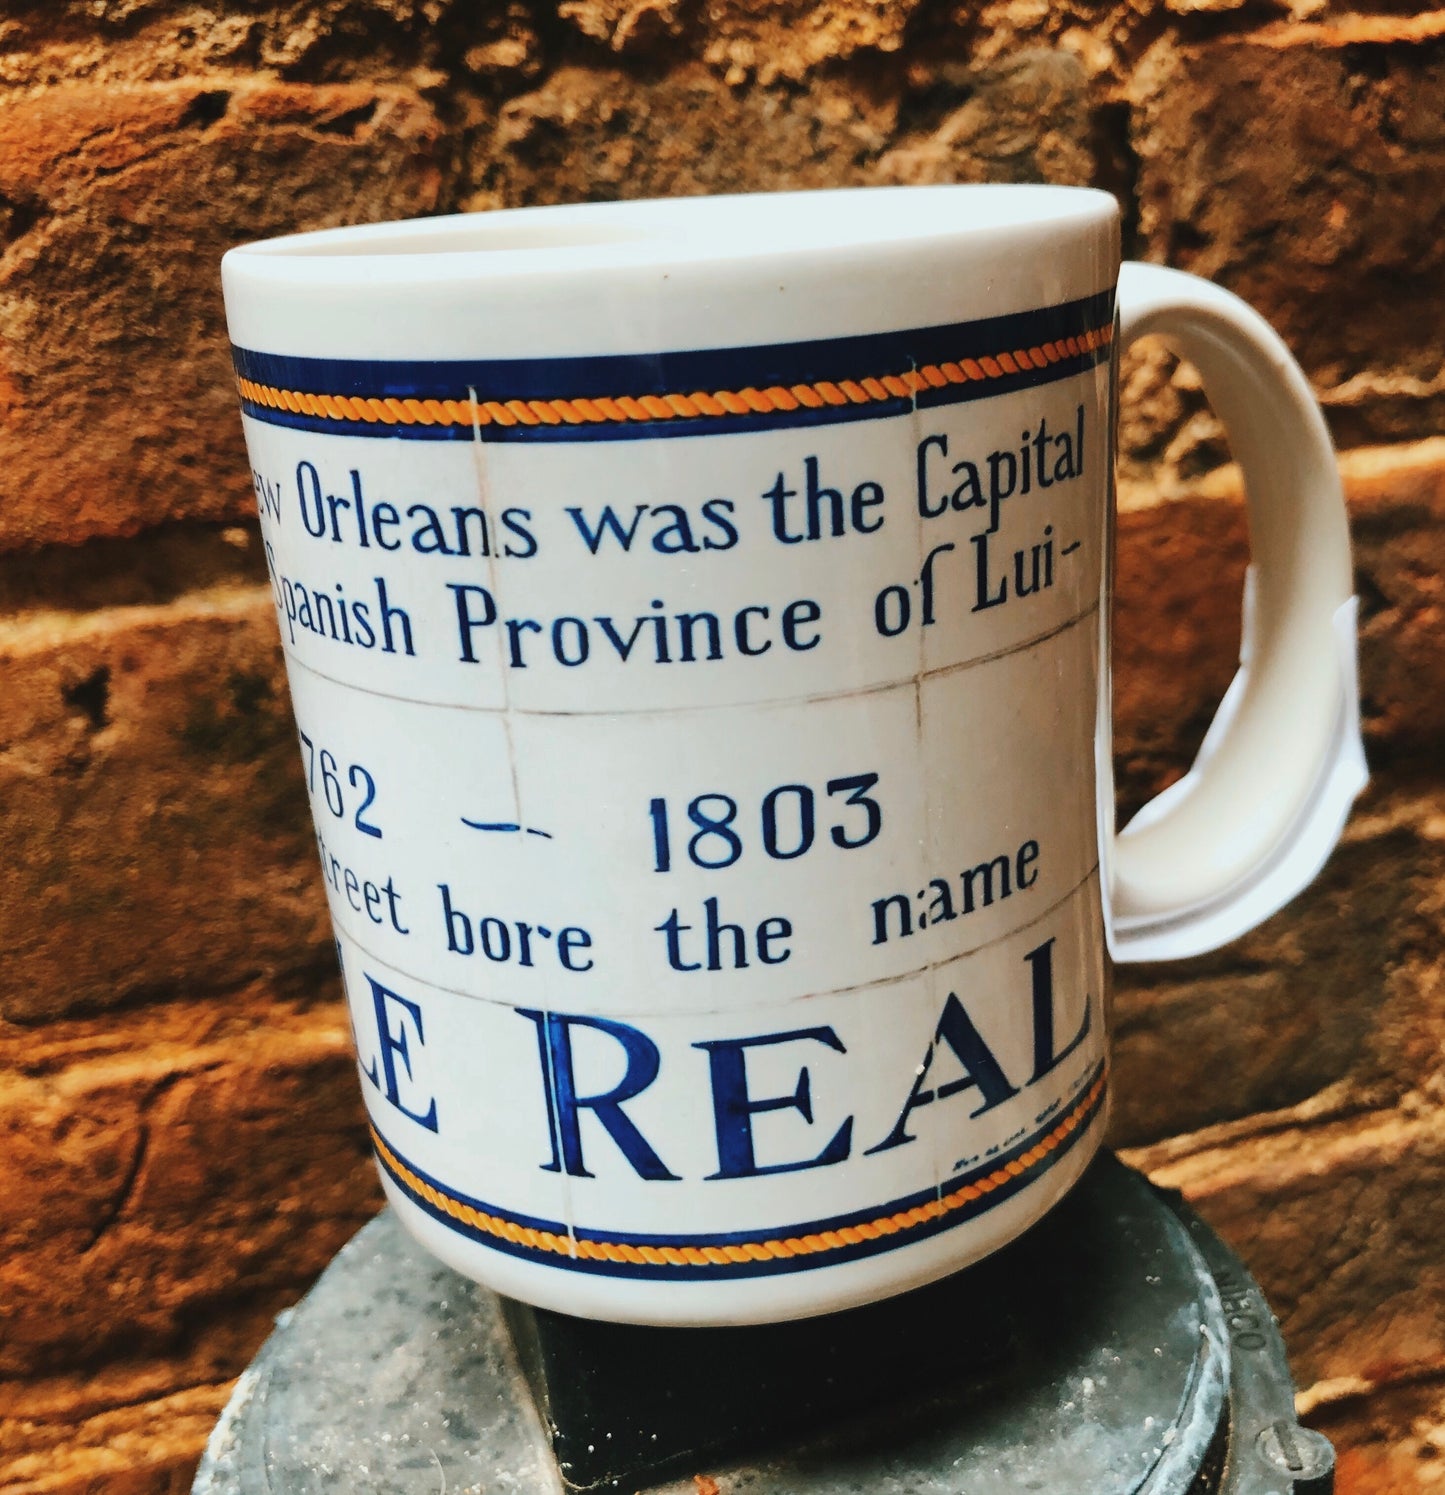 Replicas of the Spanish colonial street names found around the French Quarter. 11 oz mugs Microwave and dishwasher safe  Locally made in Louisiana  Available names: Orleans, Bourbon, Plaza D' Armas, Real (Royal), Del Main (Dumaine) and San Luis (St. Louis) 